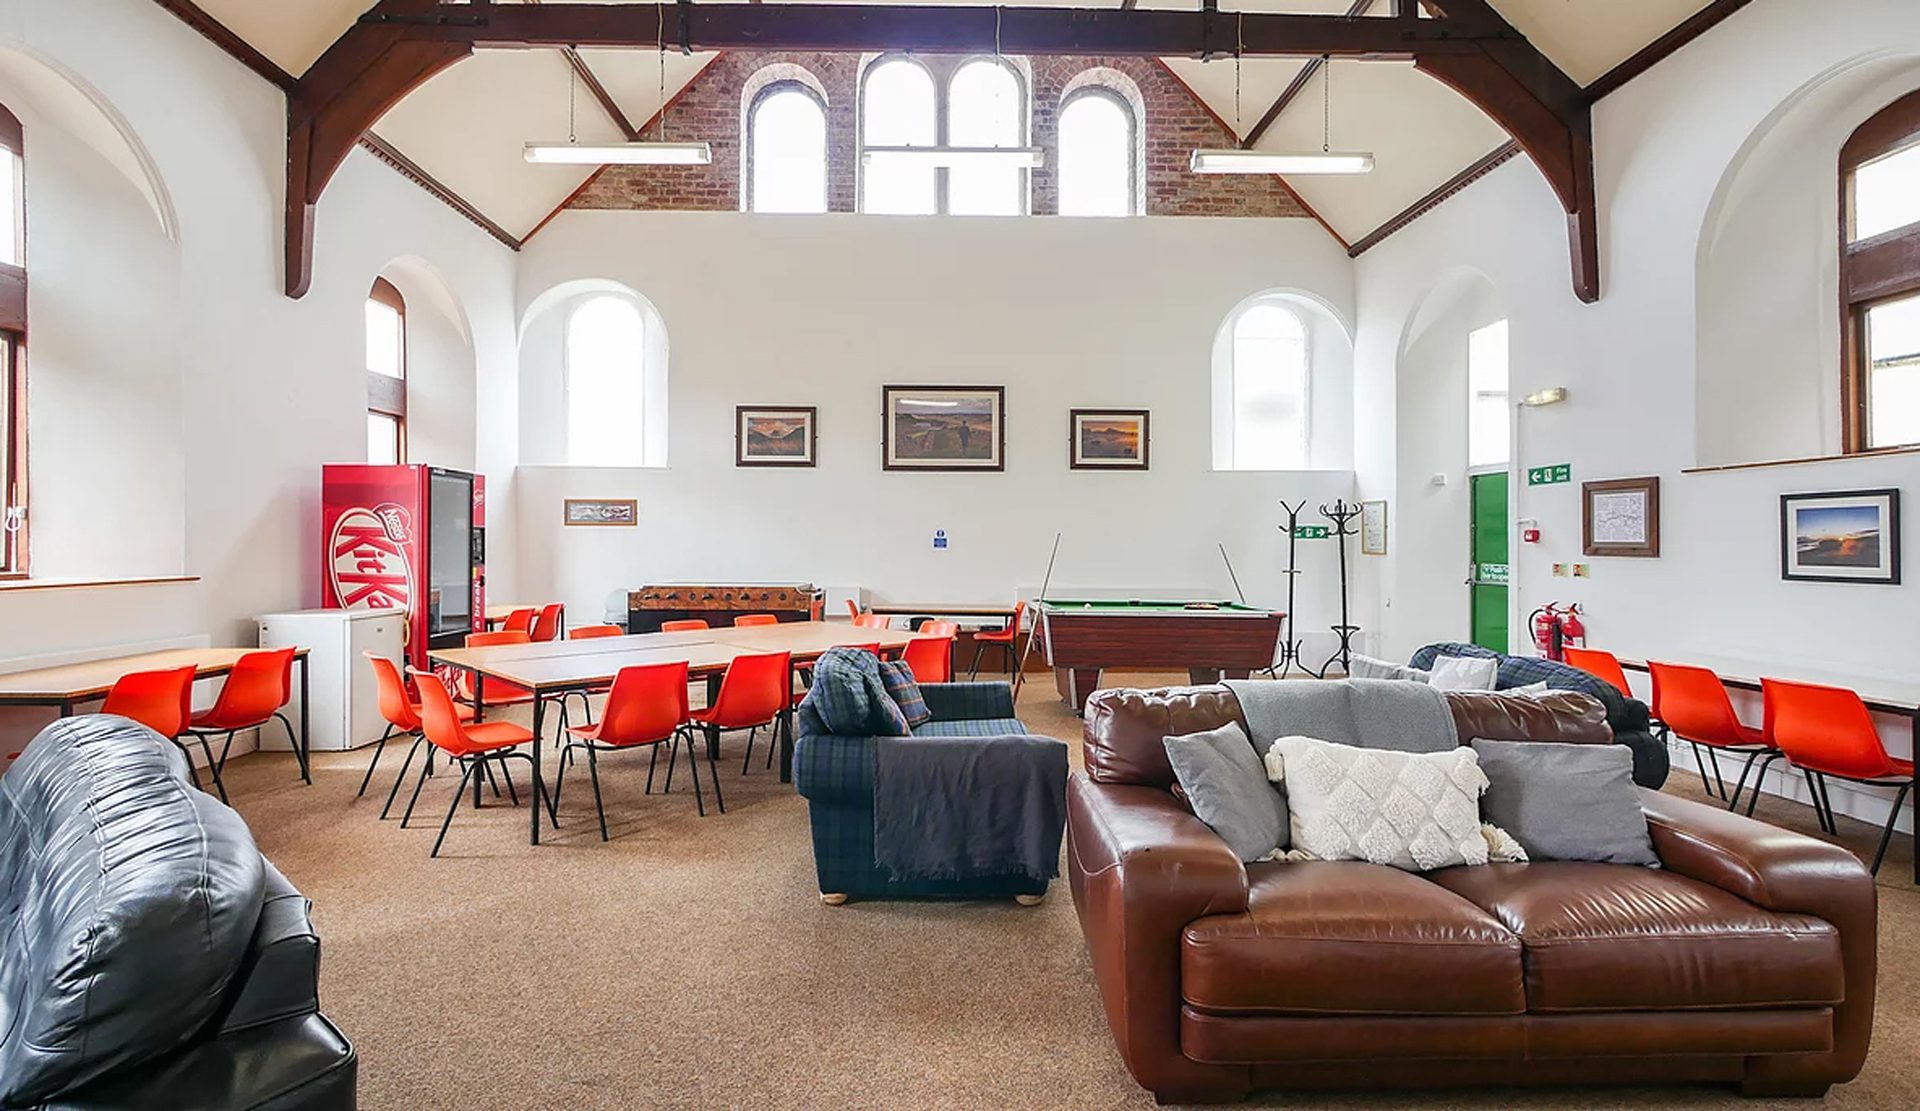 The interior of greenhead hostel with high ceilings and a sofa on hadrian's wall